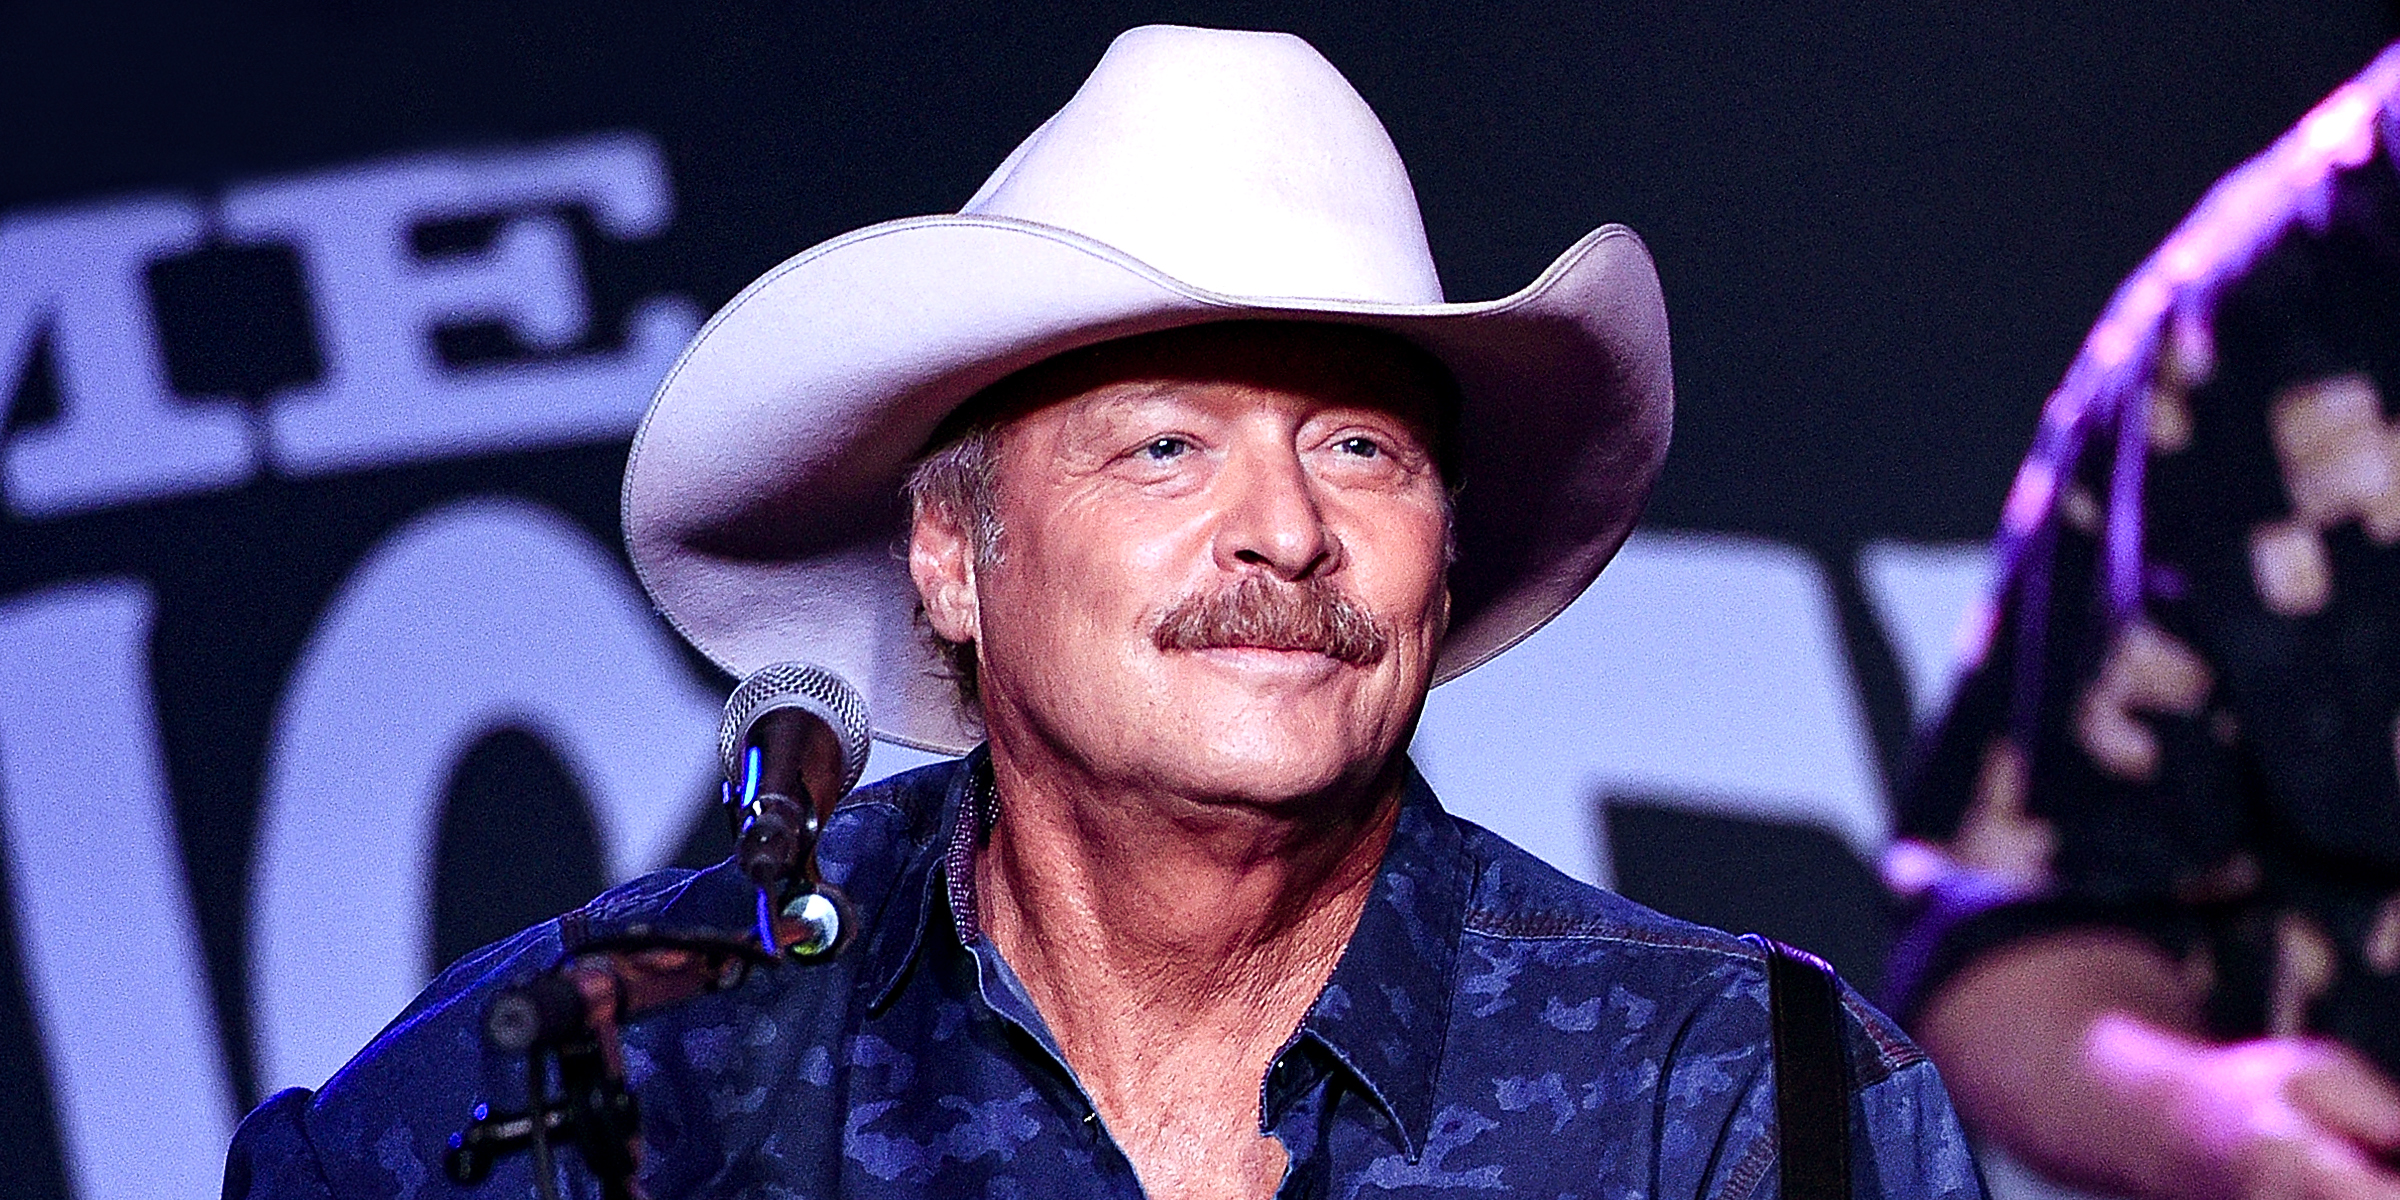 Alan Jackson | Source: Getty Images